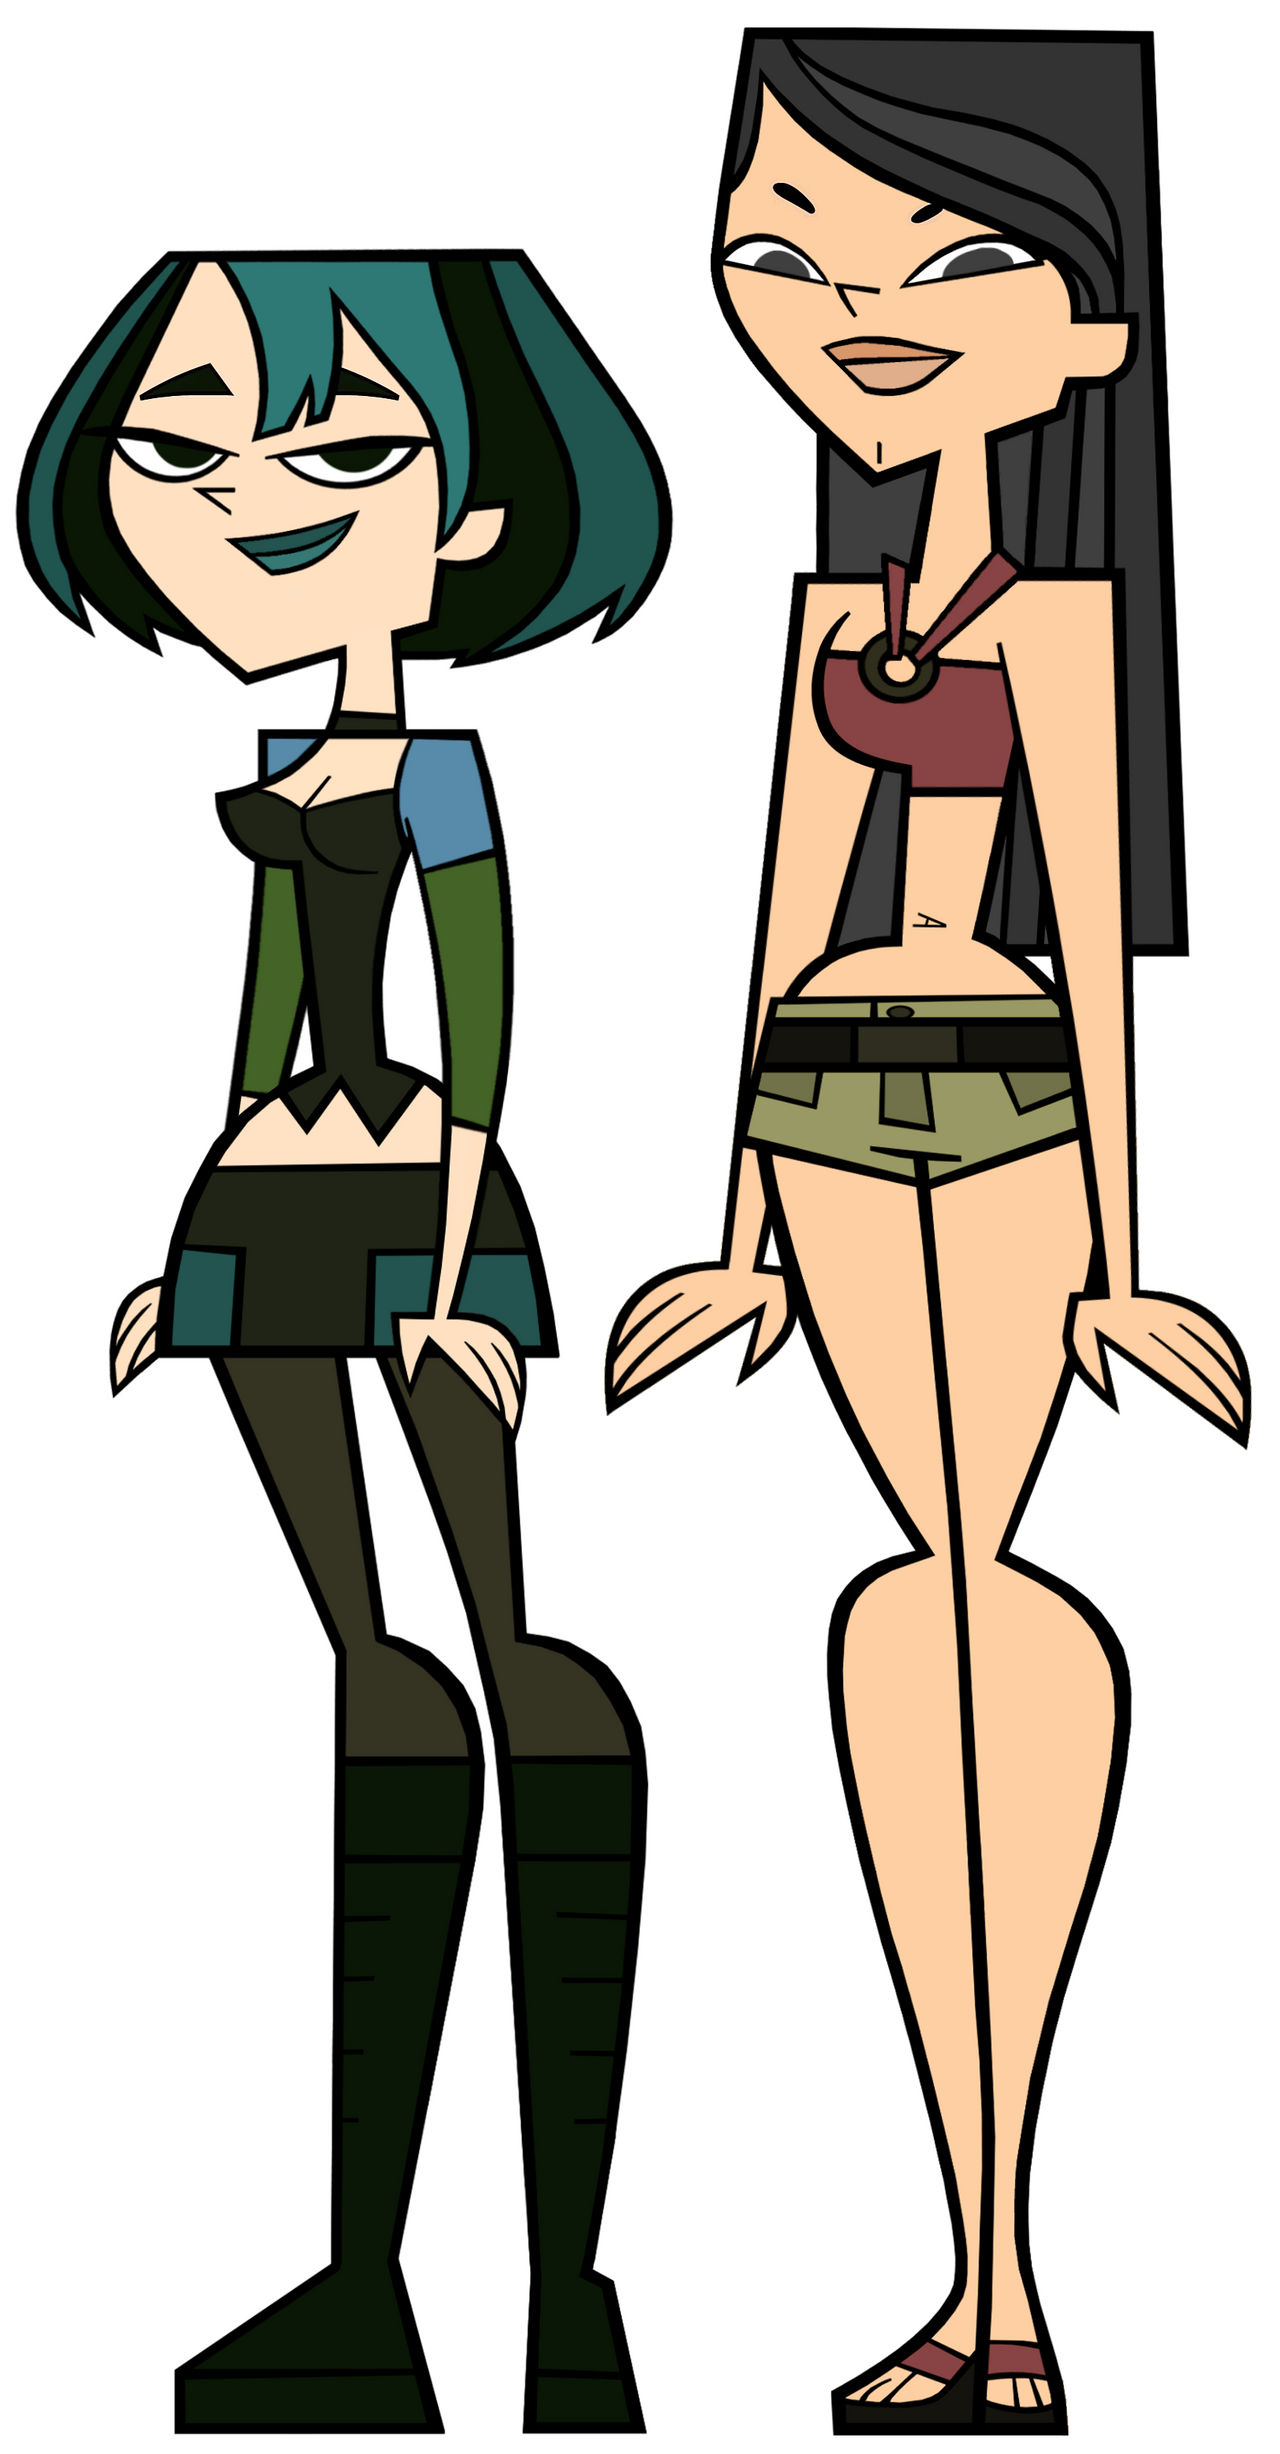 Gwen and Heather by mawii17 on DeviantArt